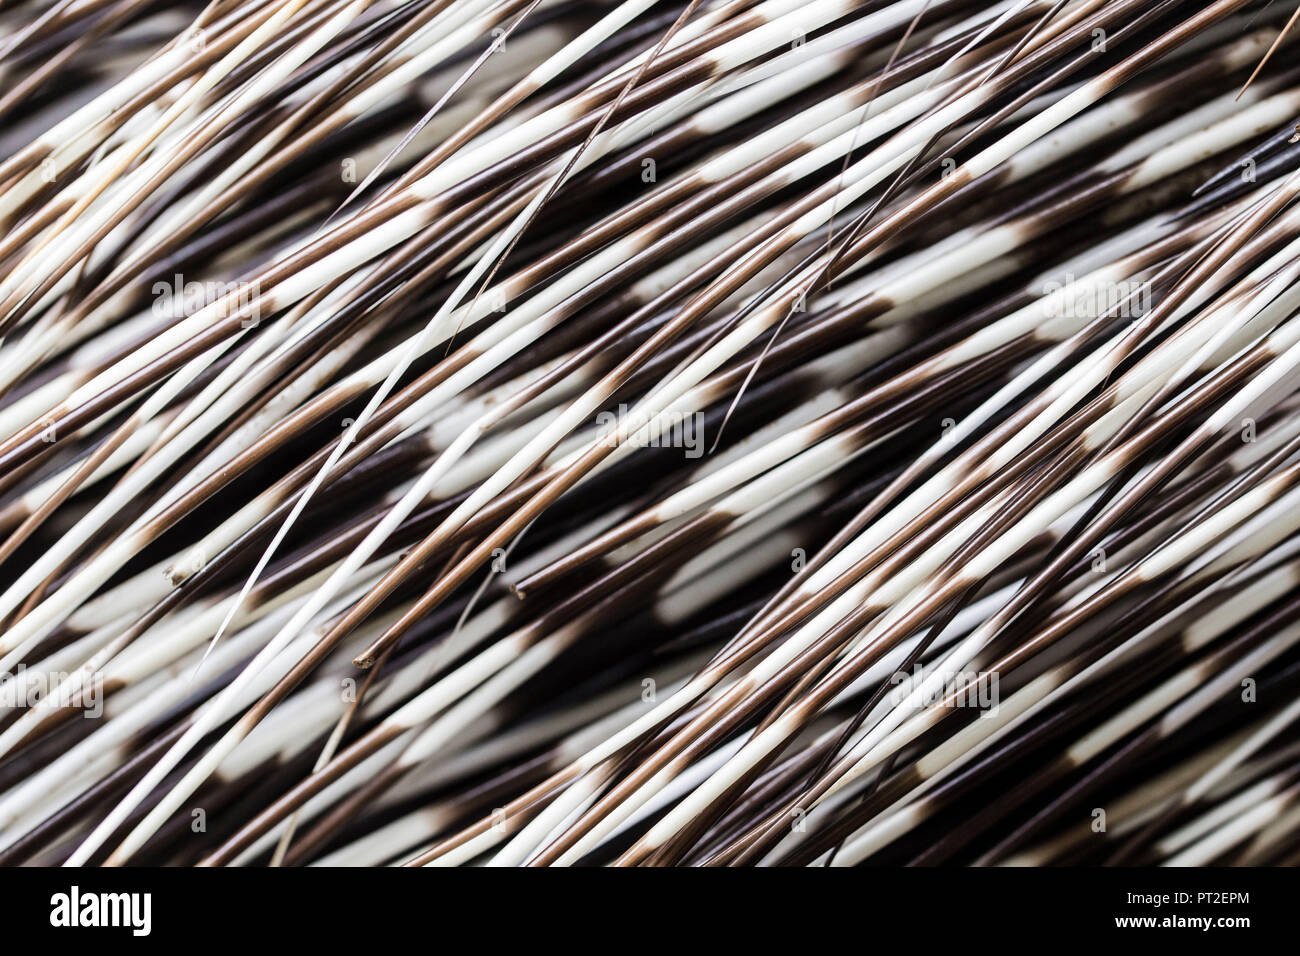 Quills of an Indian Porcupine, Hystrix indica, Indian crested porcupine, close-up, abstract, Stock Photo